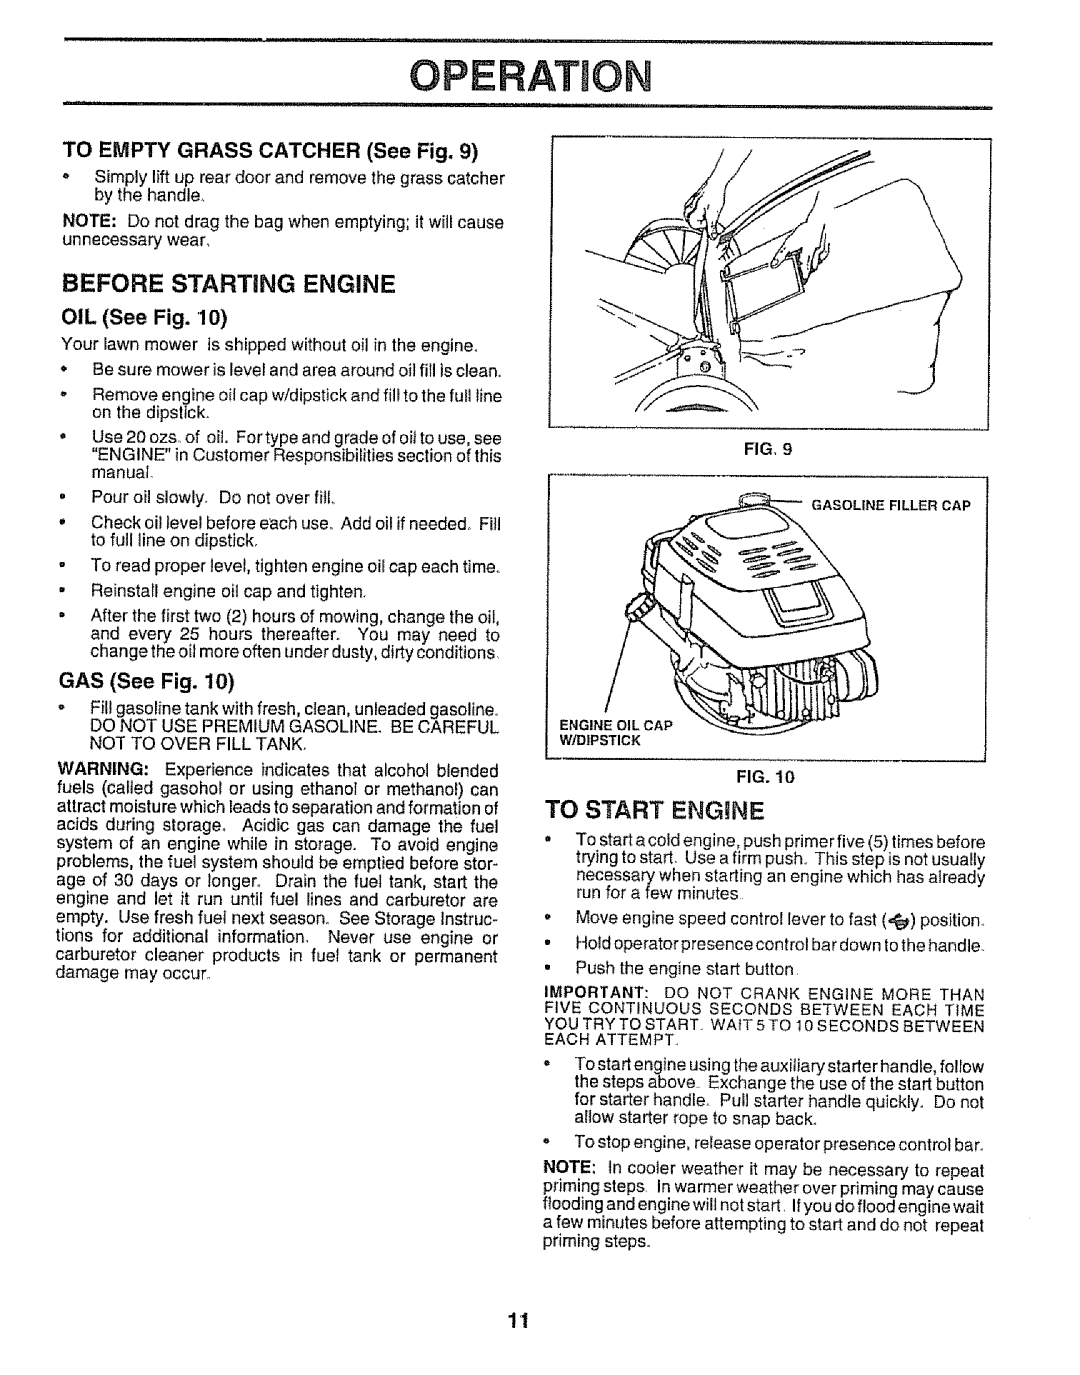 Craftsman 917.373841 owner manual Before Starting Engine, To Start Engine, OIL See Fig, GAS See Fig 